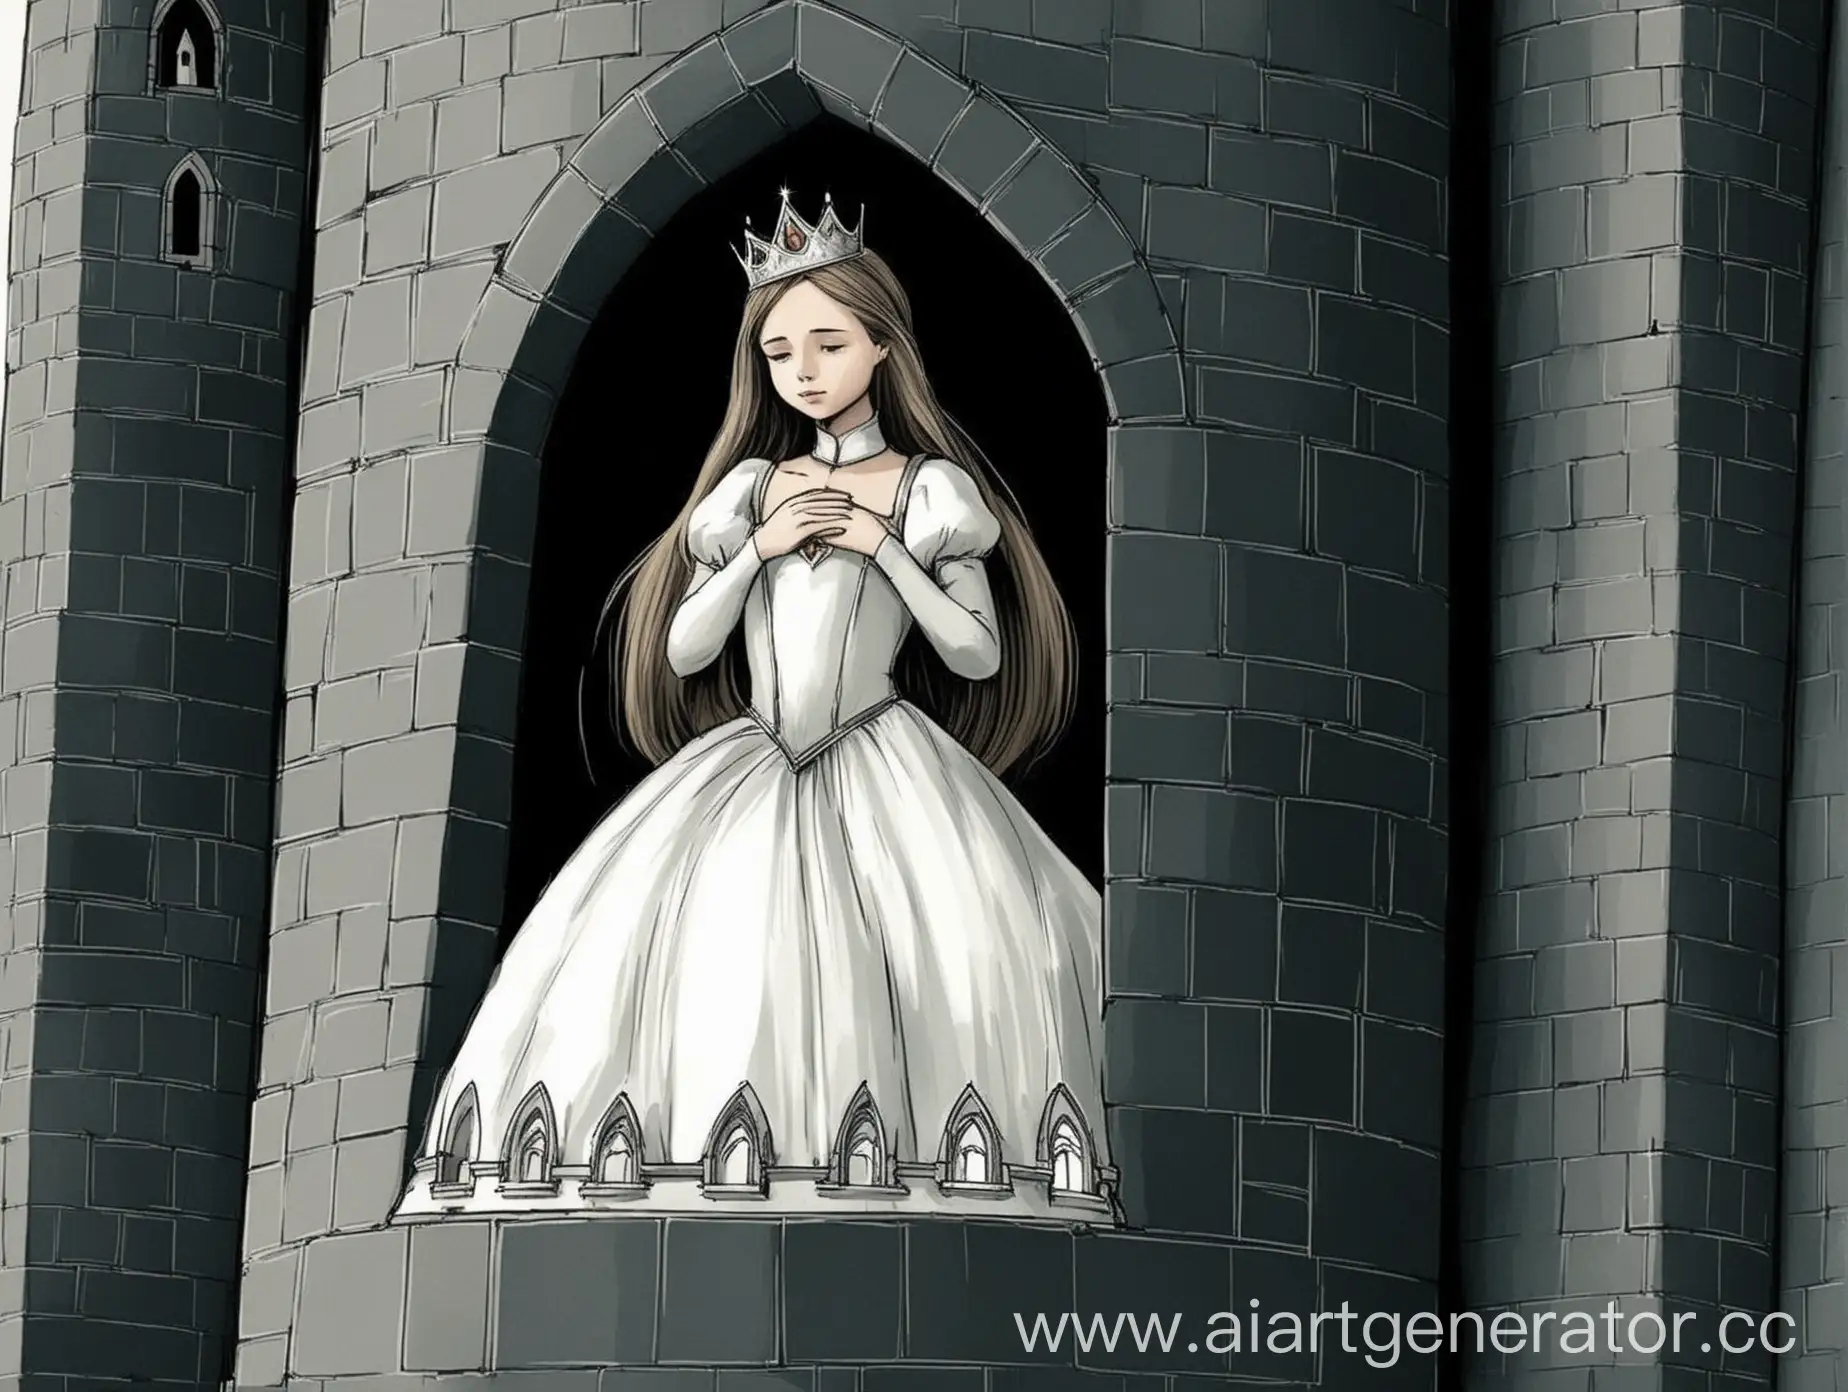 Lonely-Princess-in-Tower-Yearns-for-Freedom